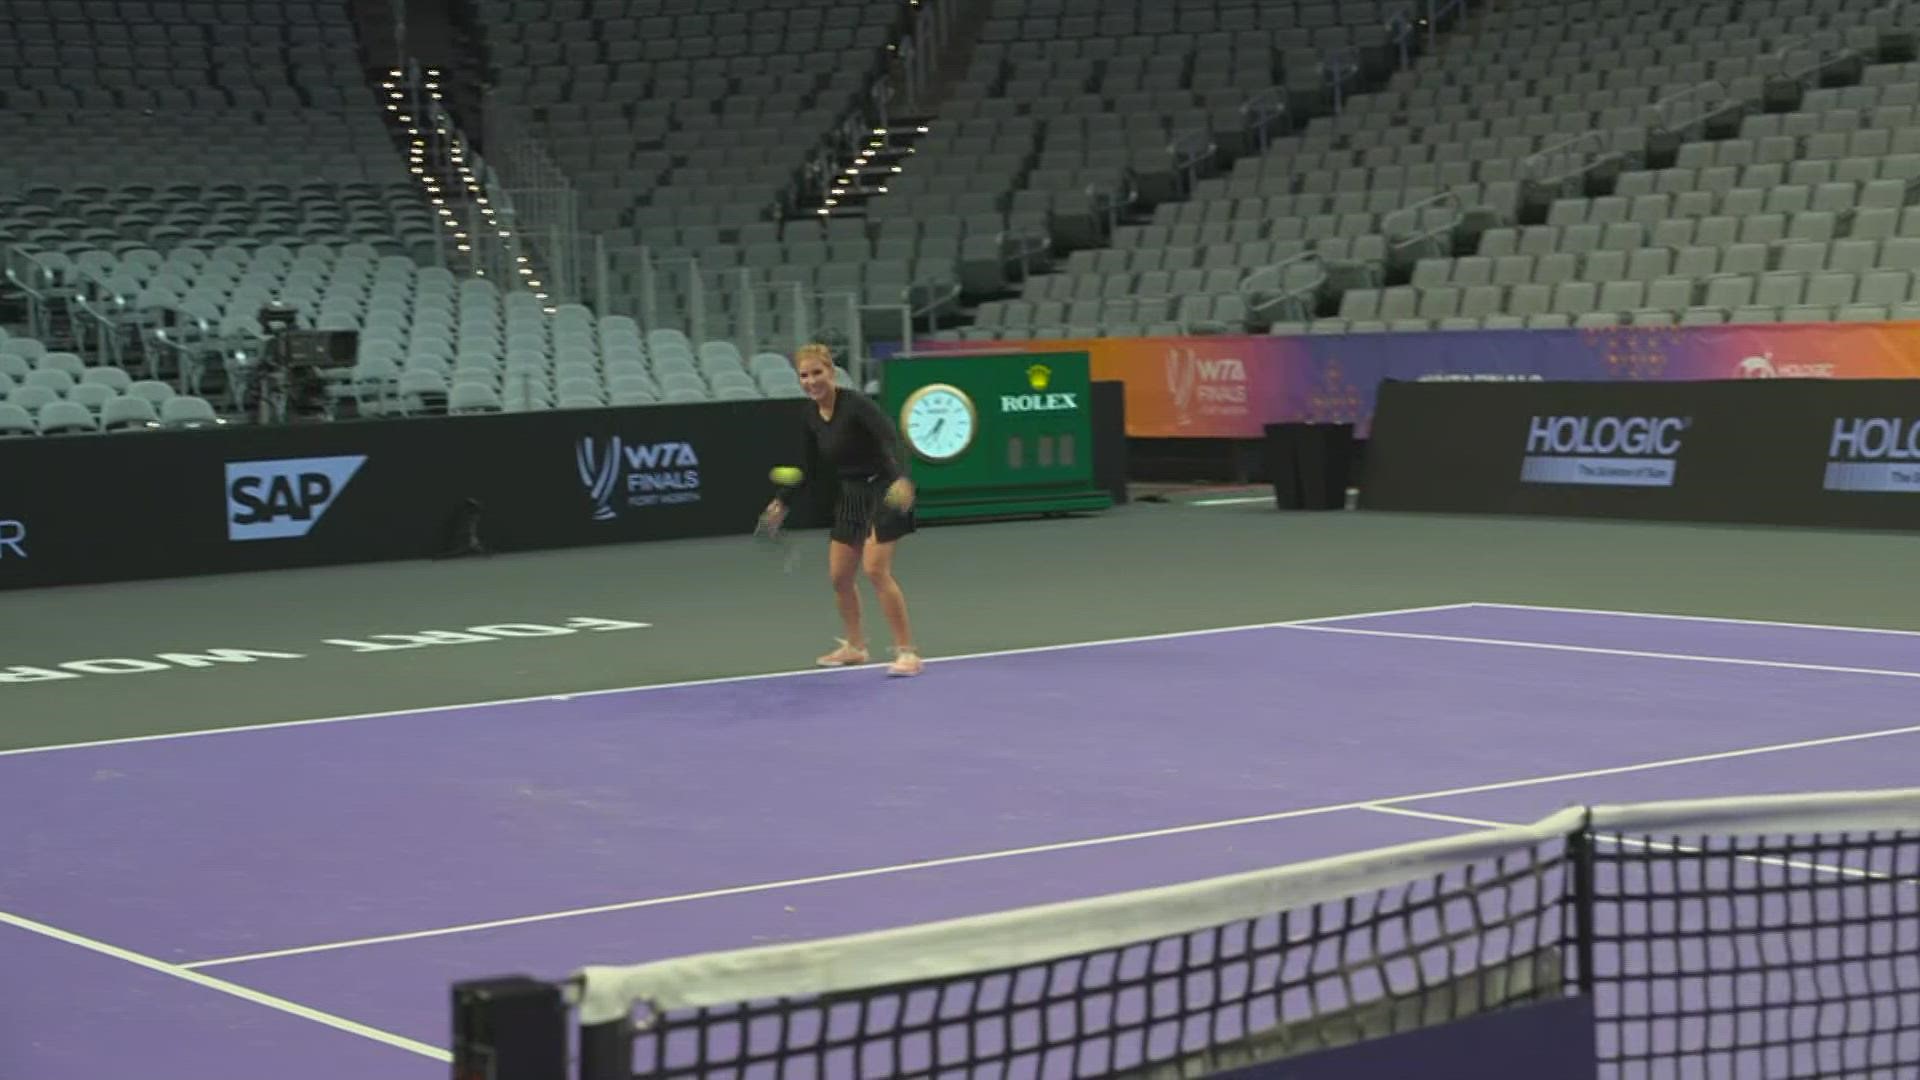 Why the WTA Finals chose Fort Worth and Dickies Arena wfaa